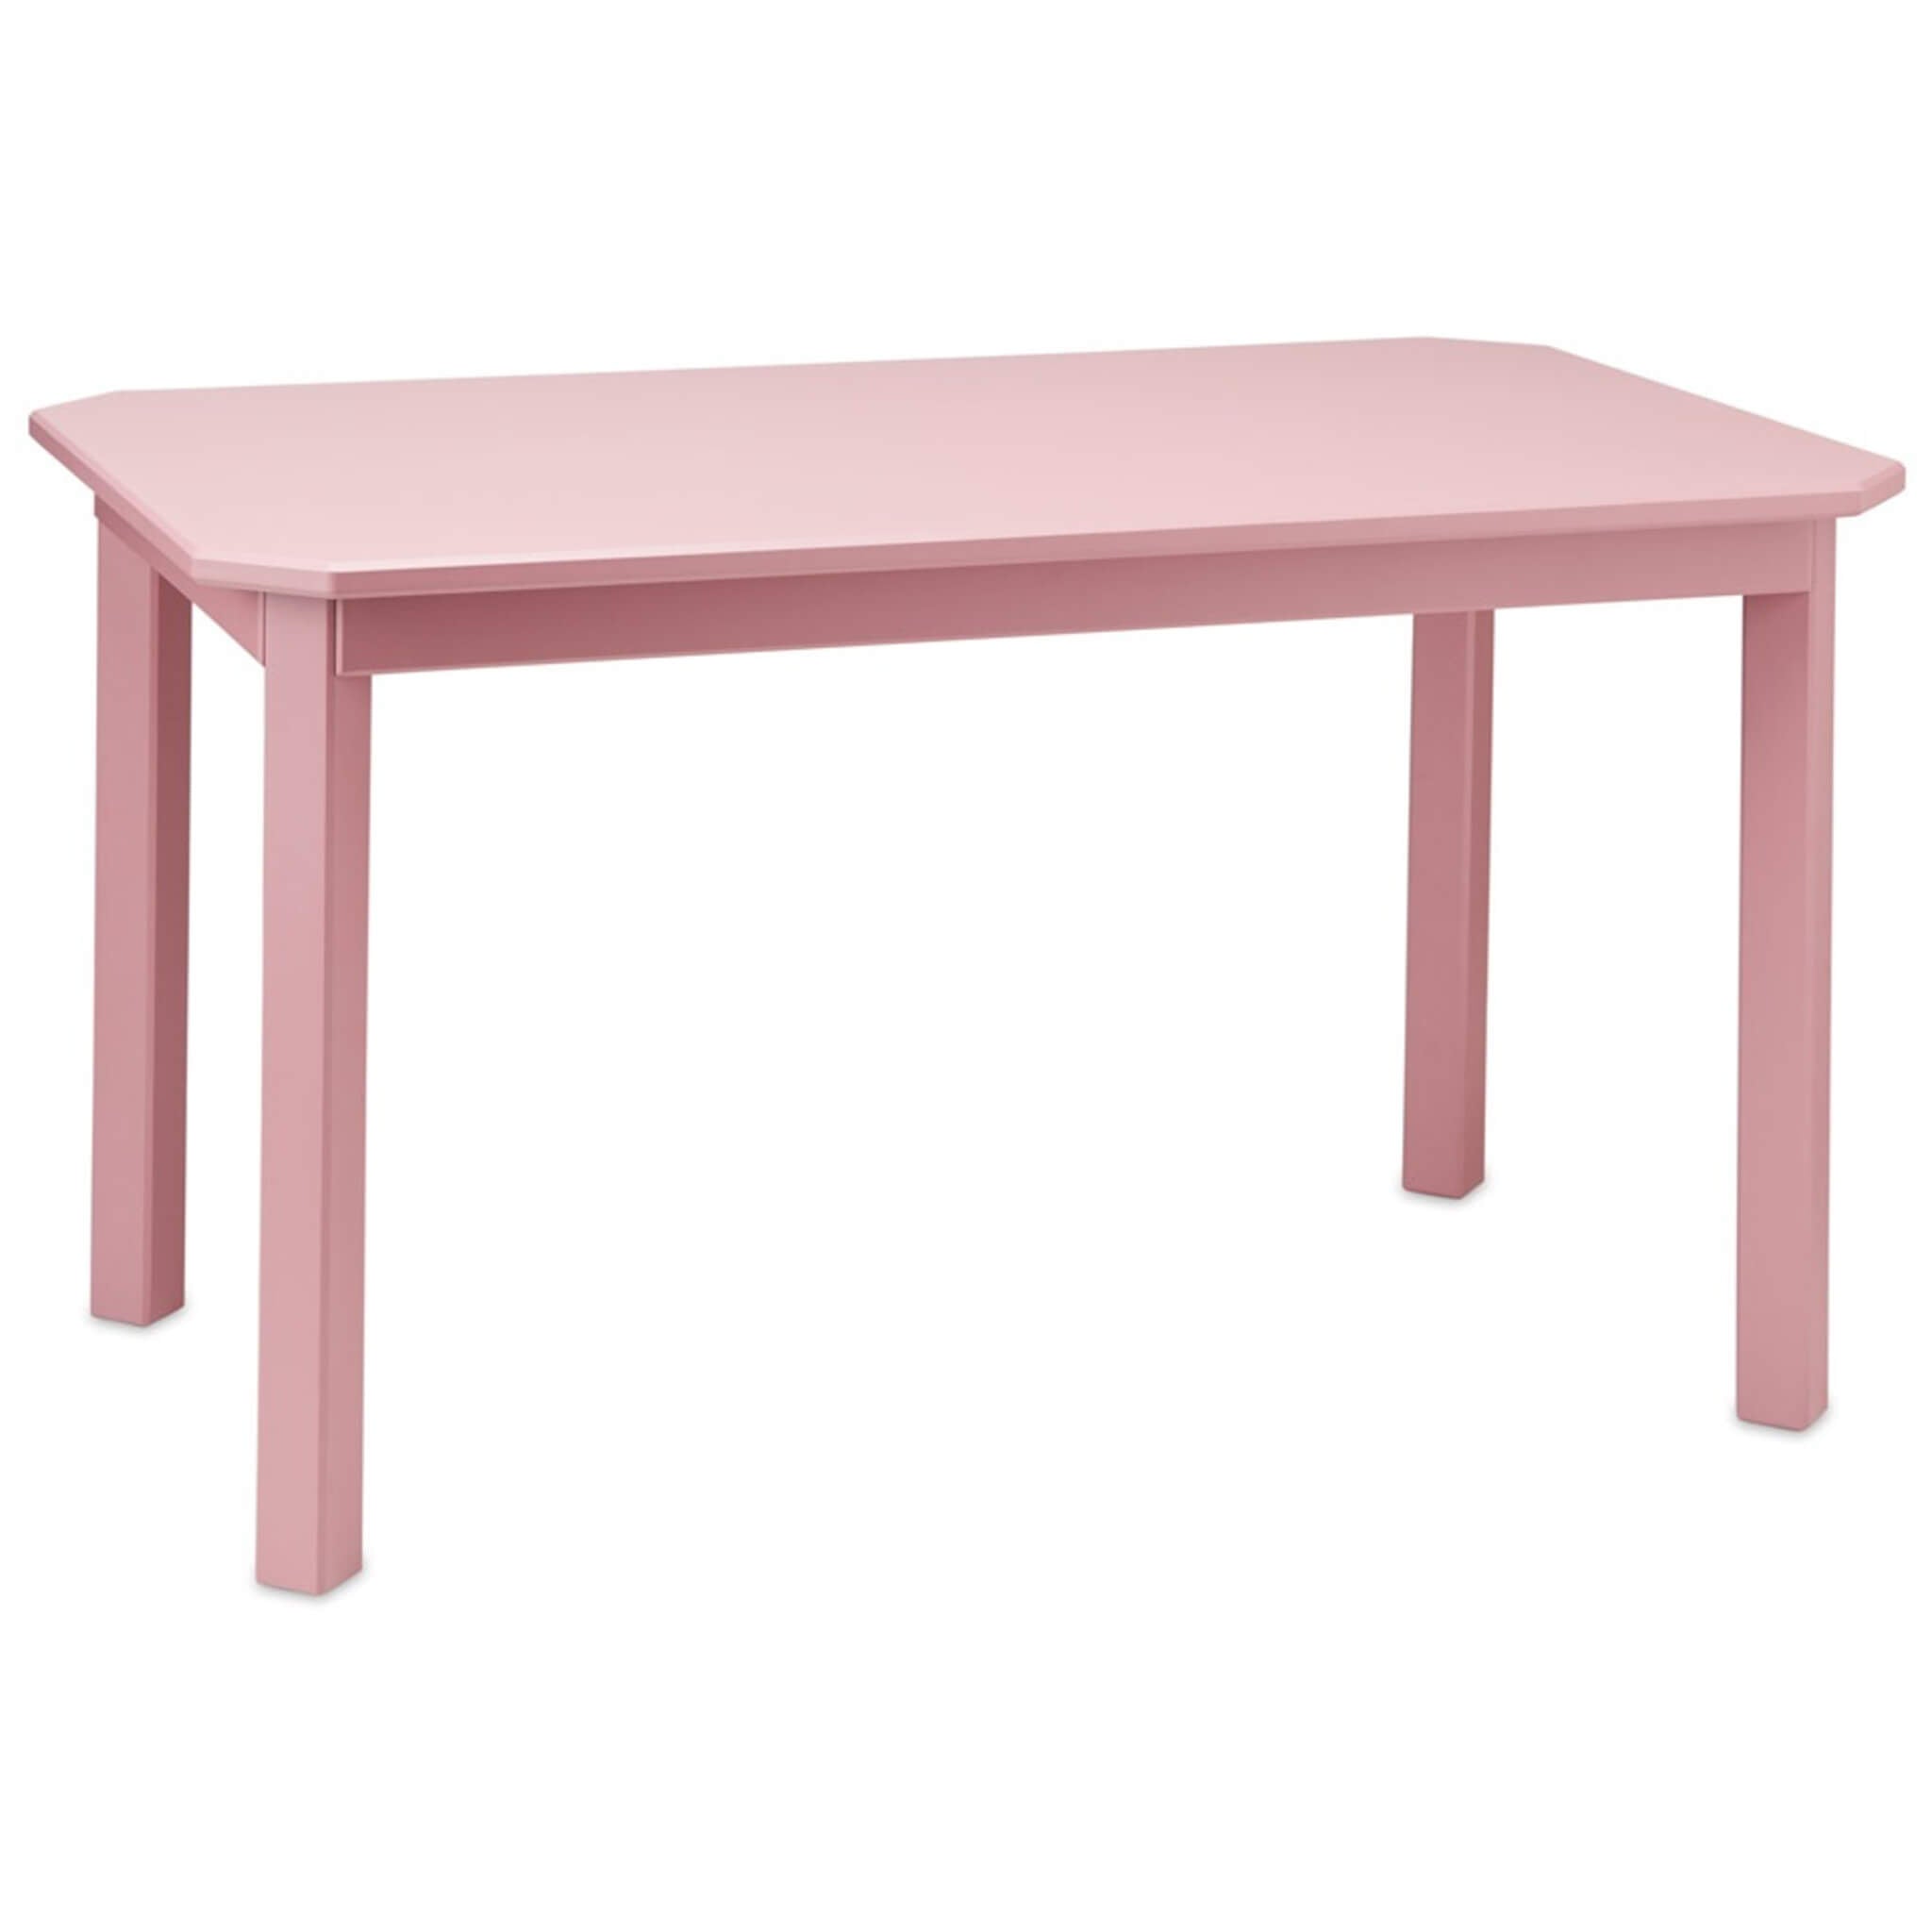 Harlequin Table - Berry